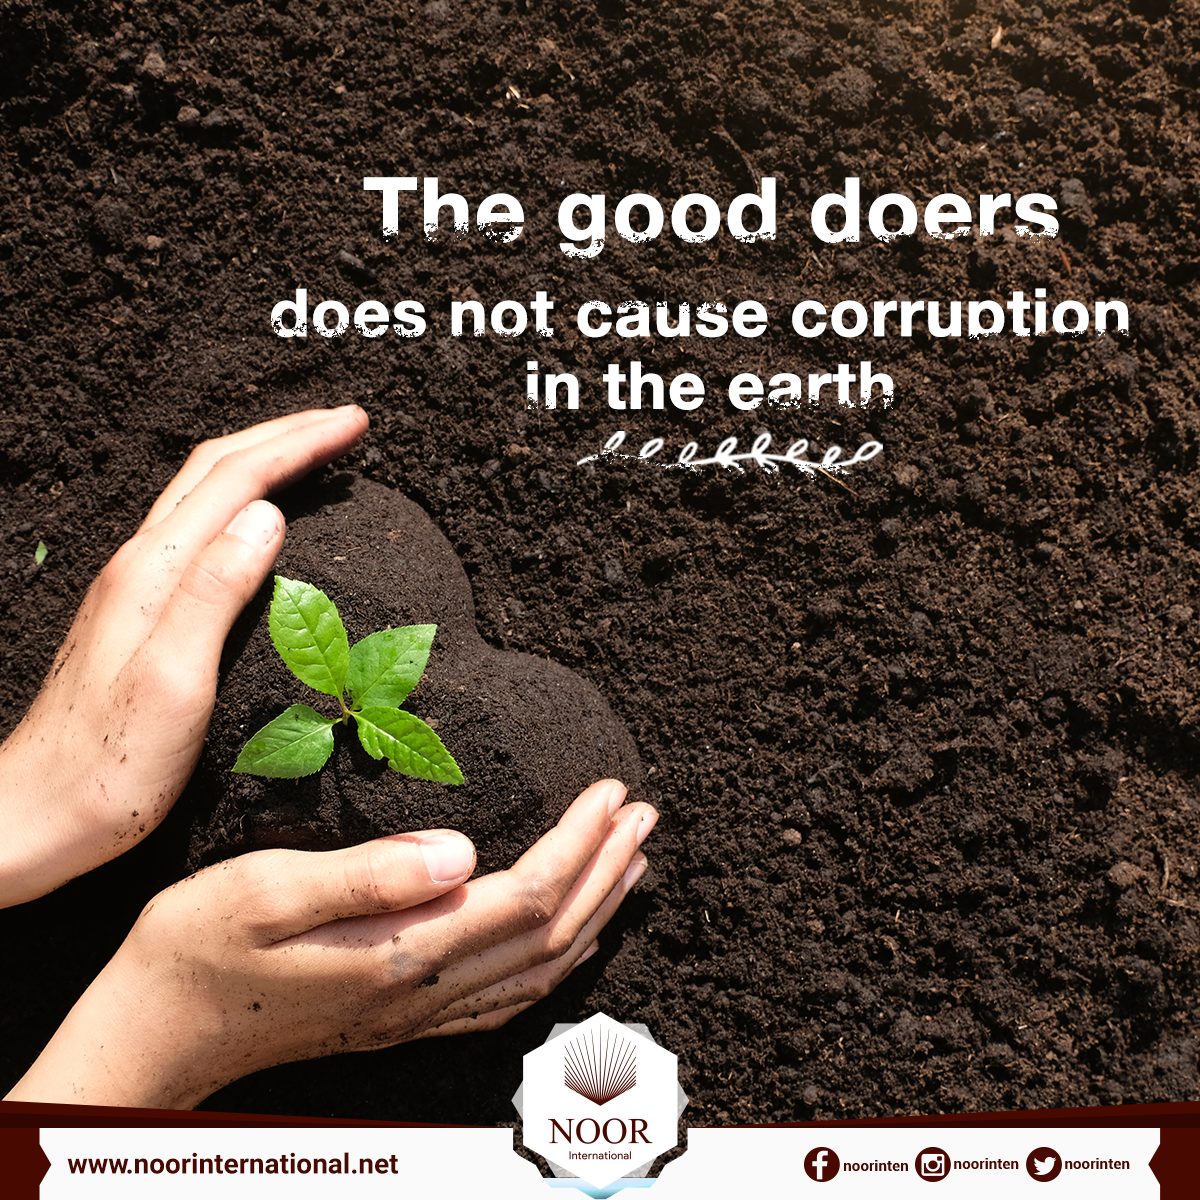 The good doers does not cause corruption in the earth